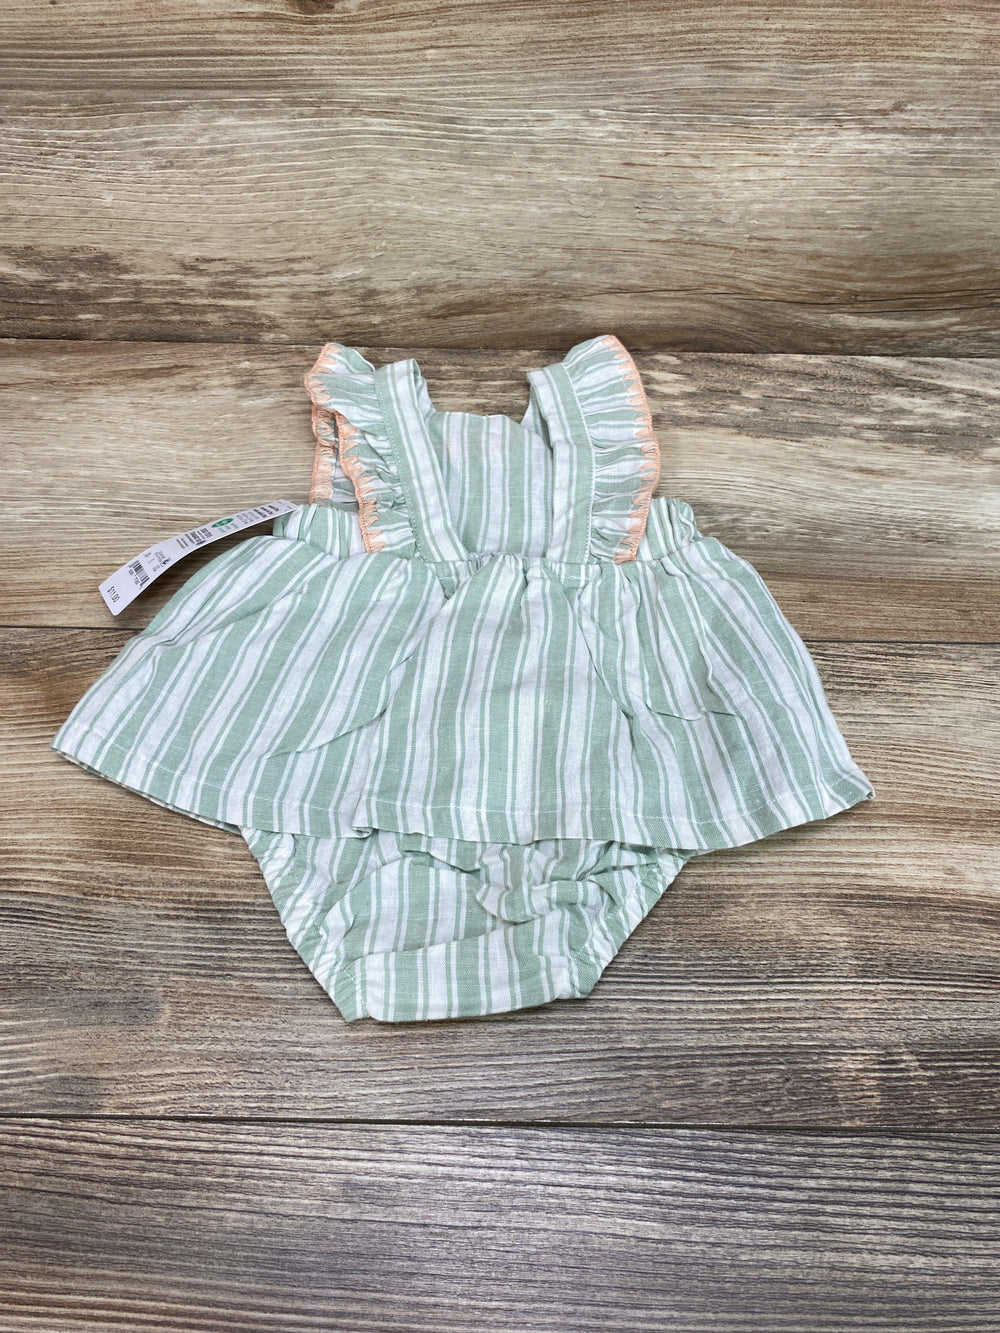 NEW Just One You Green Striped Bodysuit Dress sz Newborn - Me 'n Mommy To Be